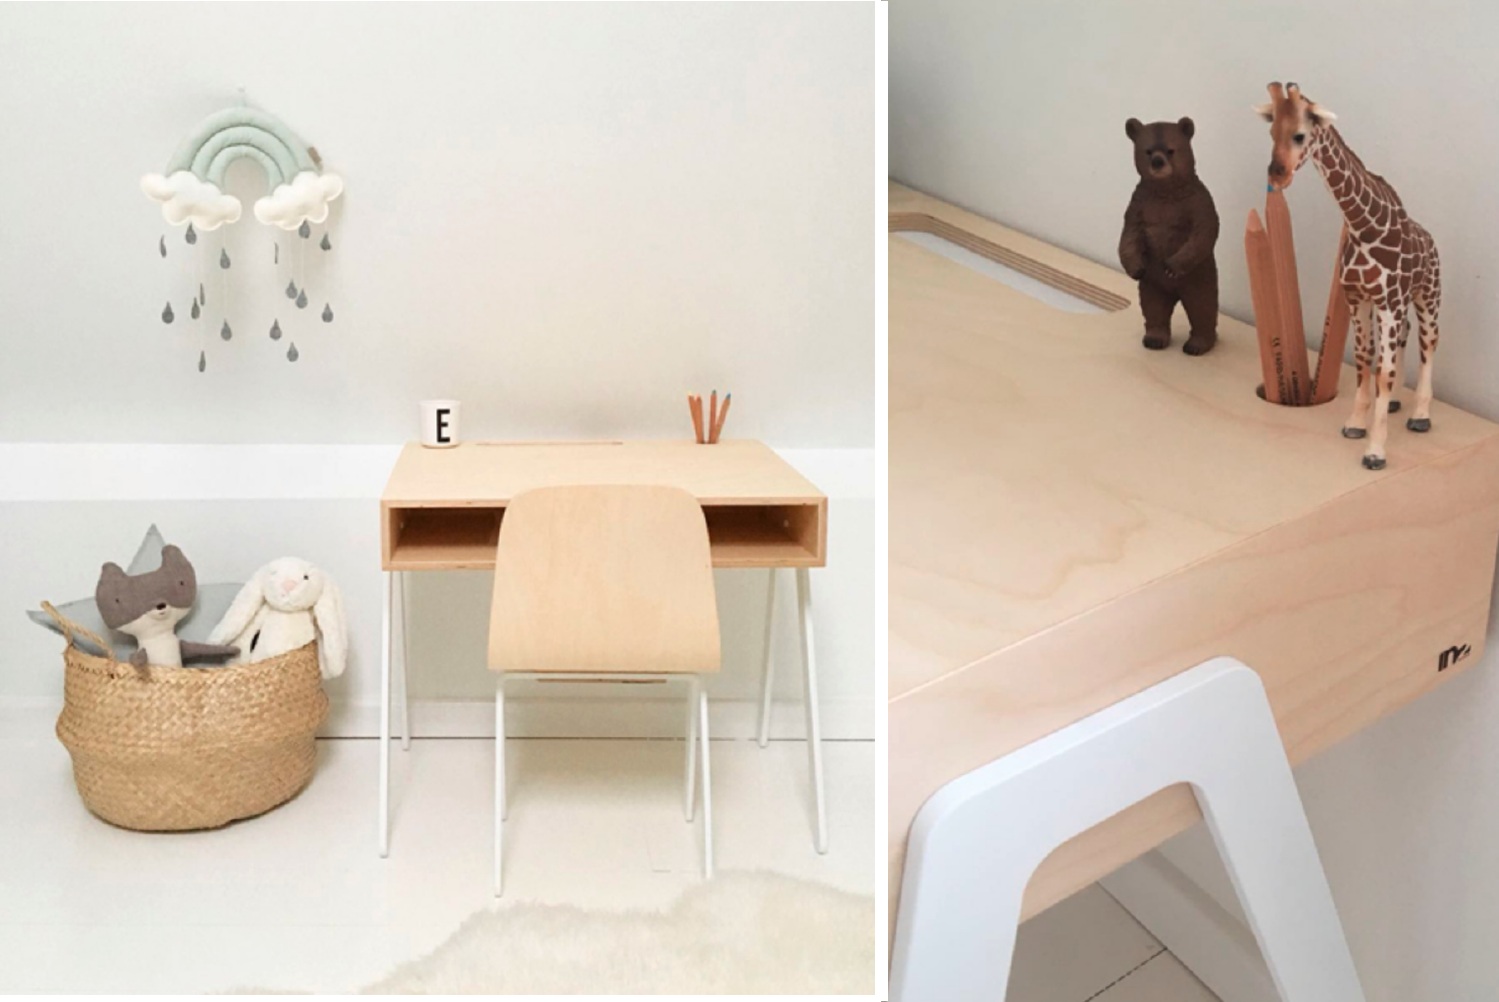   Kids Desk &amp; Chair by In2wood  - Official picture  